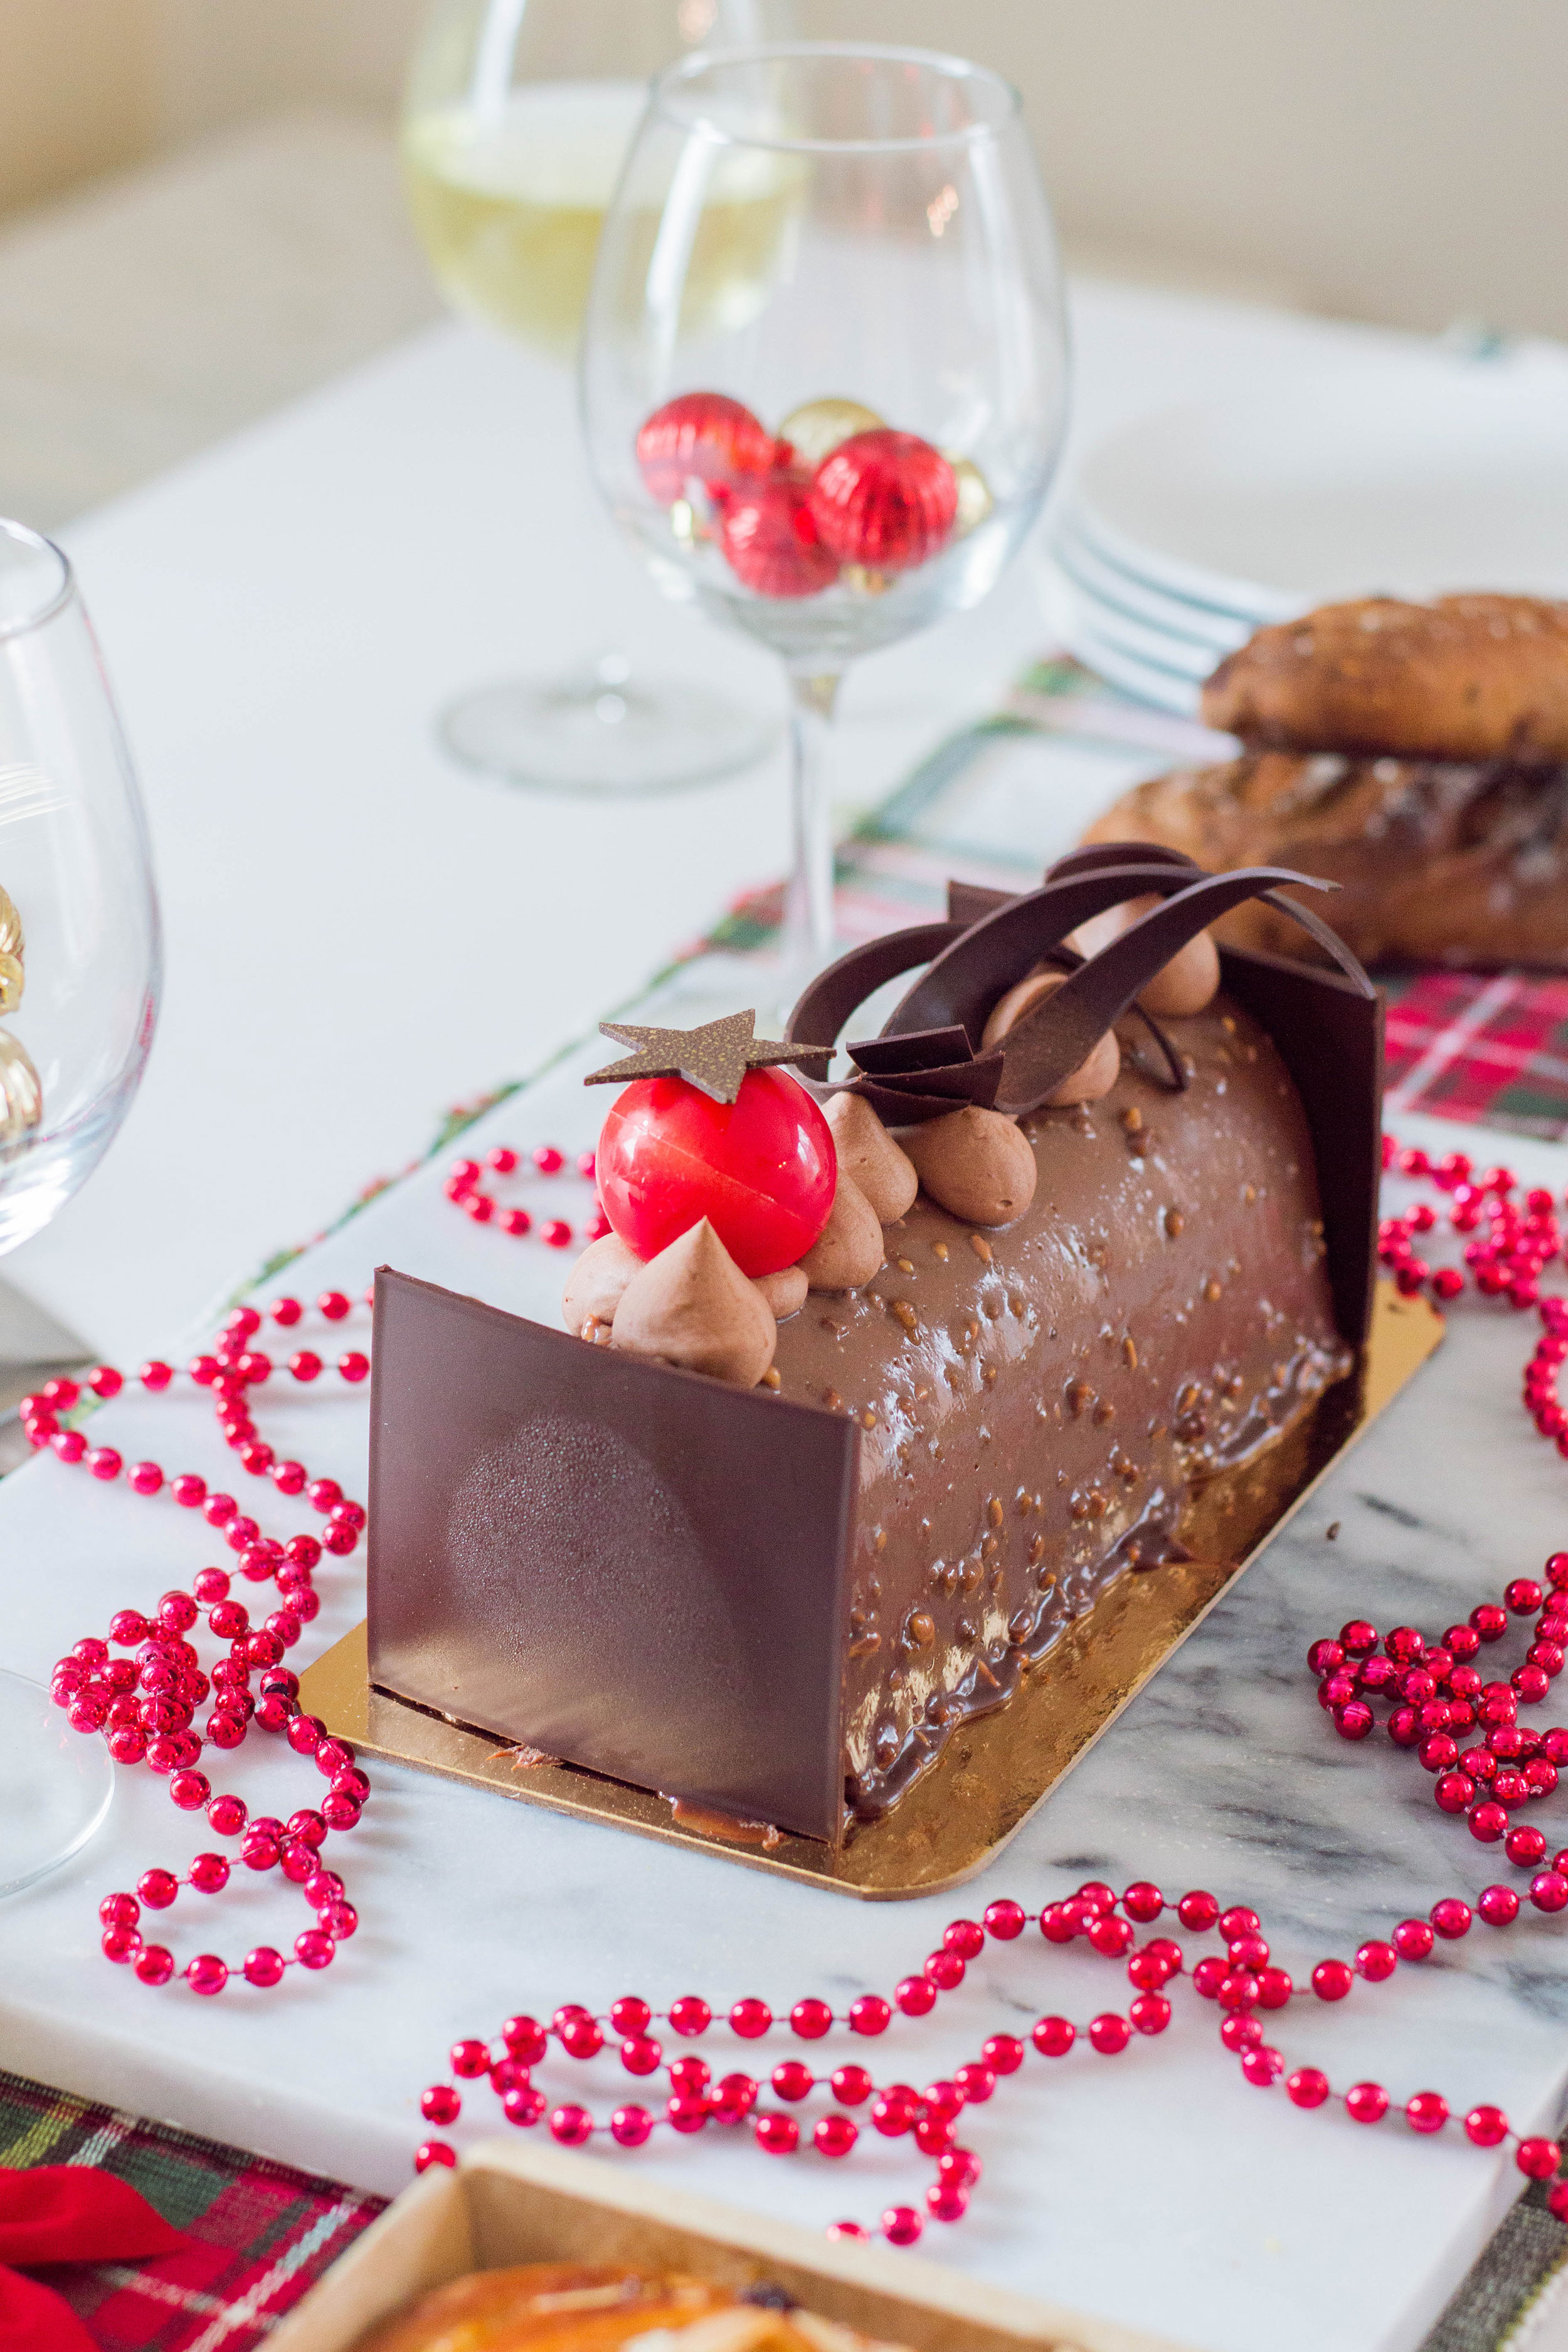 Ready to host for the holidays? Here's how to put together the sweetest Christmas dessert table. #christmasdesserts